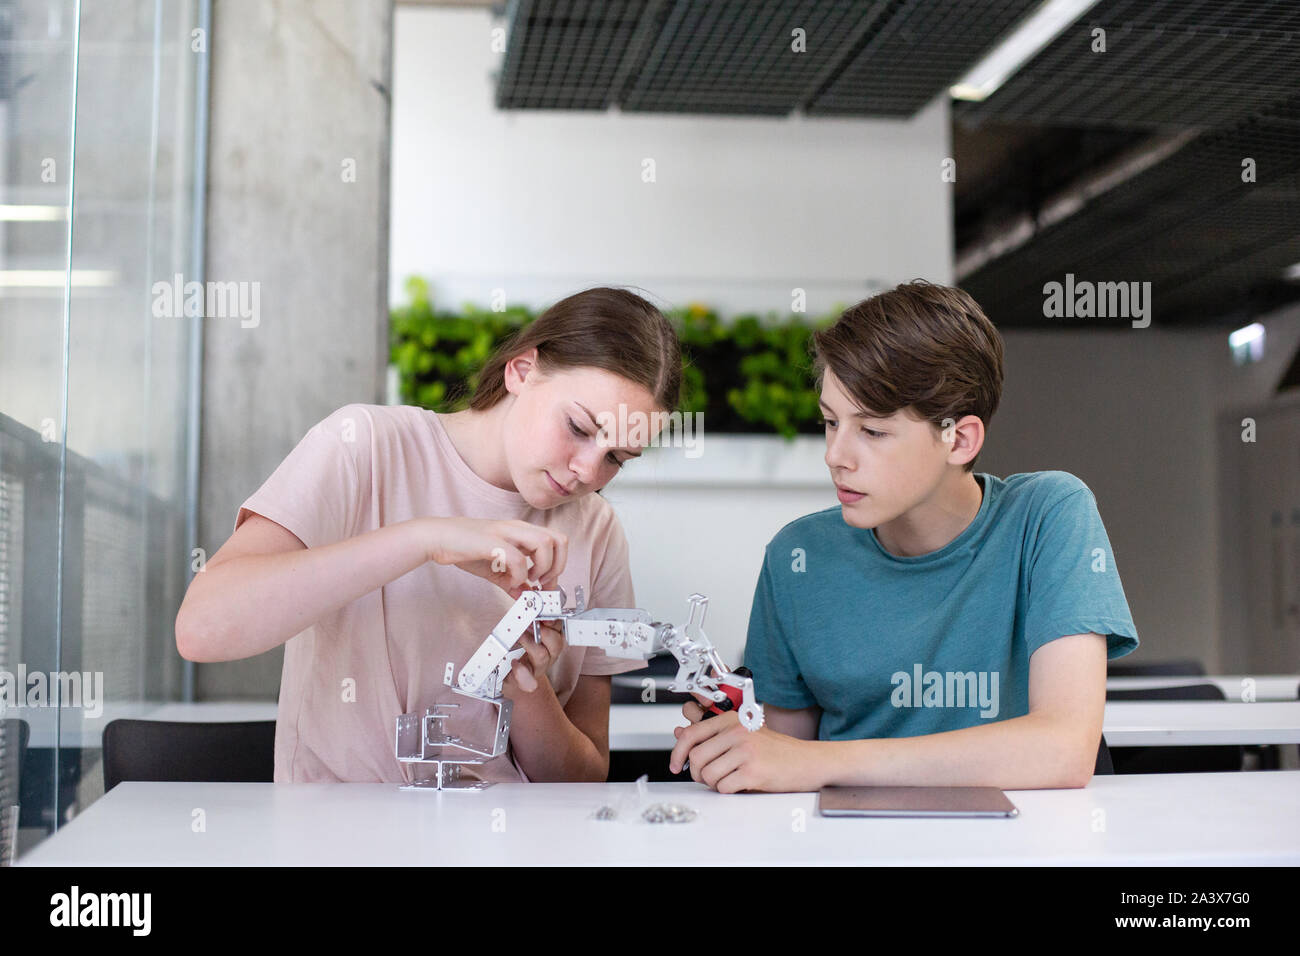 High school students working on a robotic arm in class Stock Photo